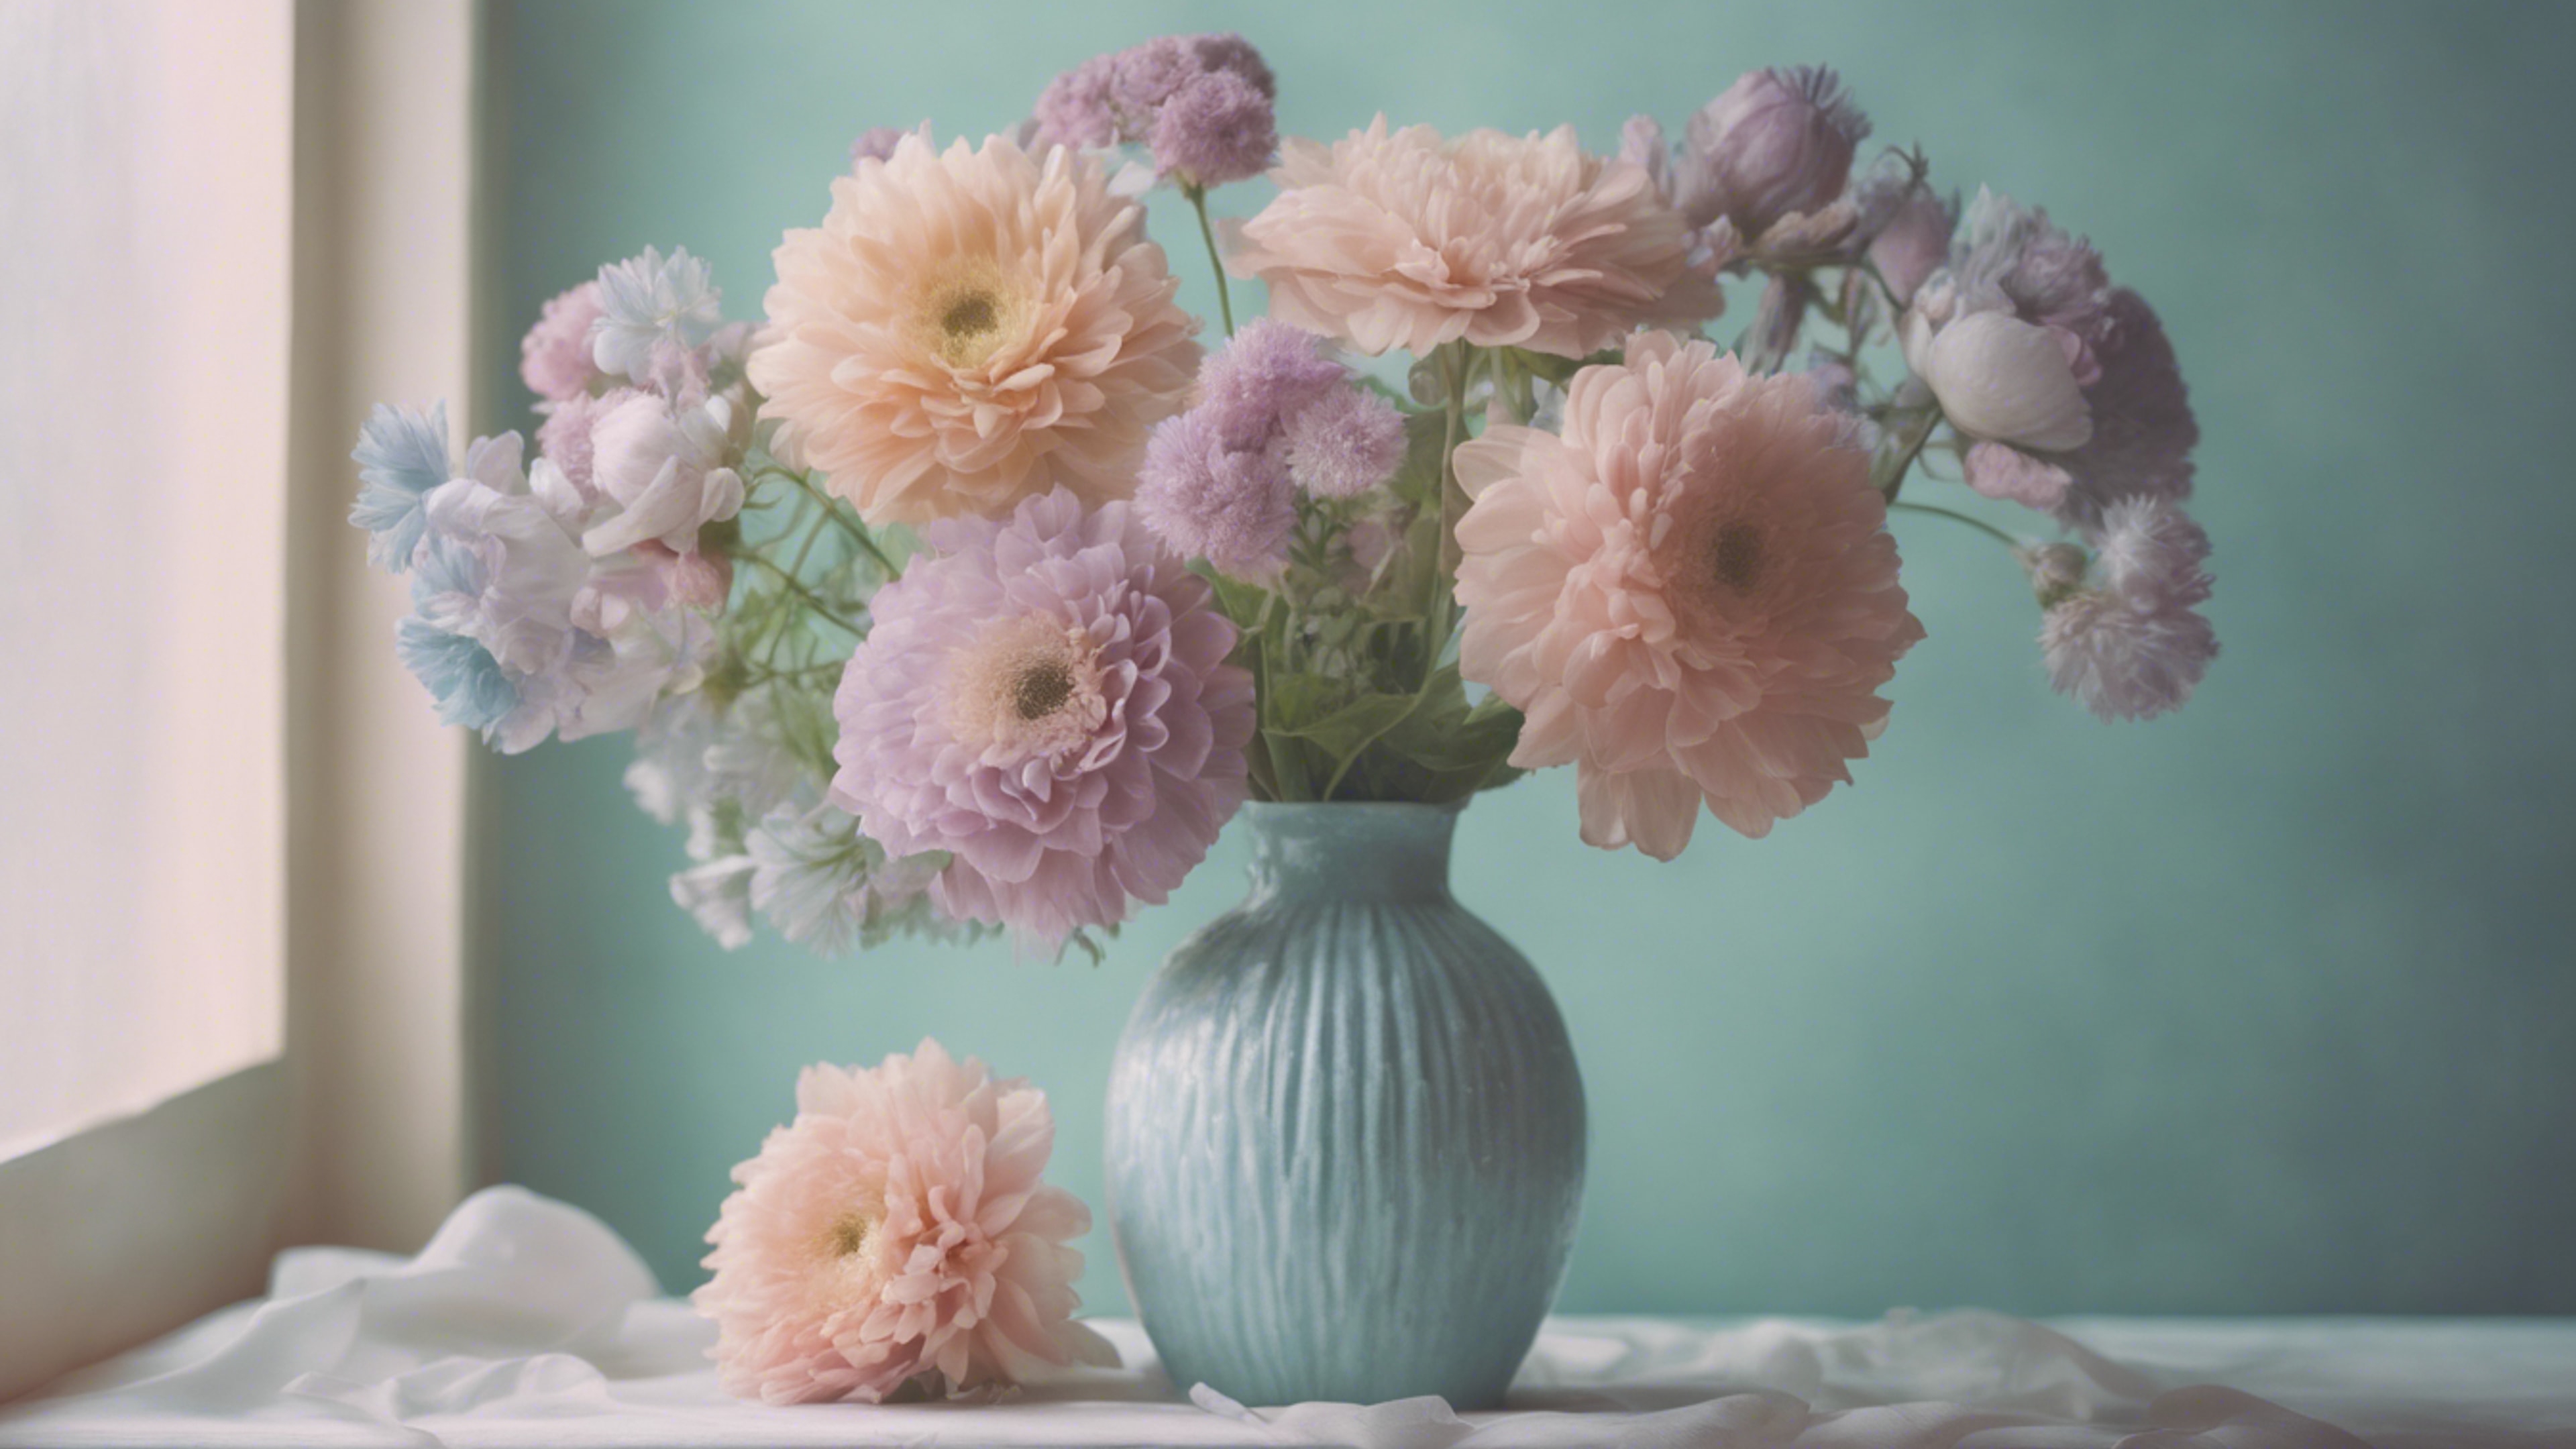 A pastel toned still-life painting featuring cool pastel colored flowers in a vase. Wallpaper[6e1327f815a34bc2b32b]